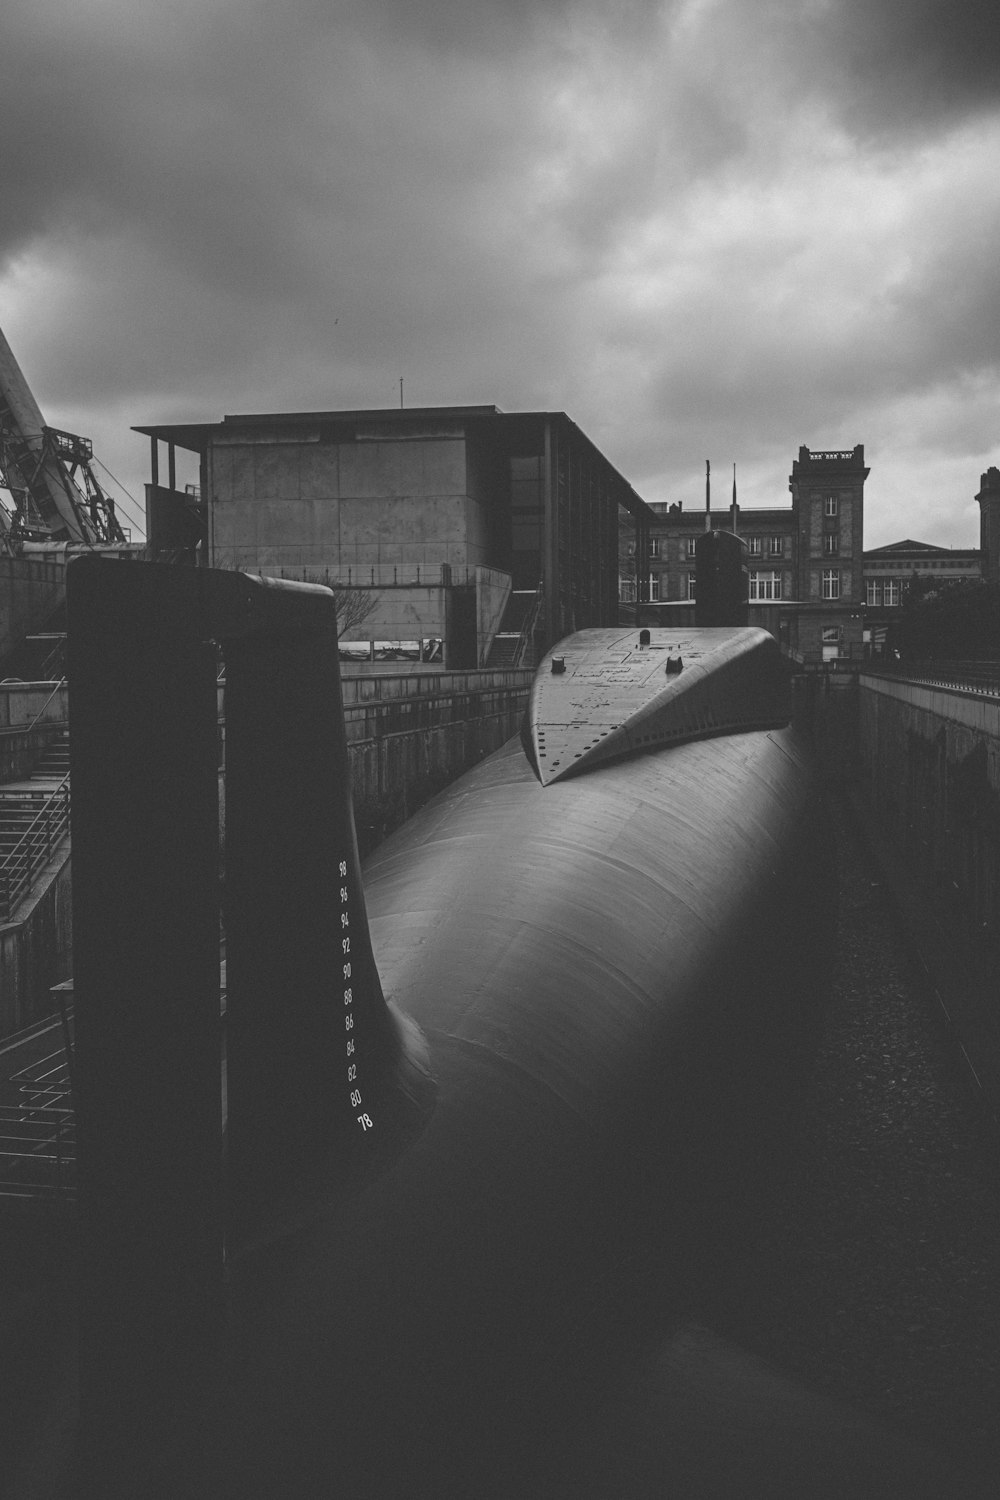 a black and white photo of a large pipe